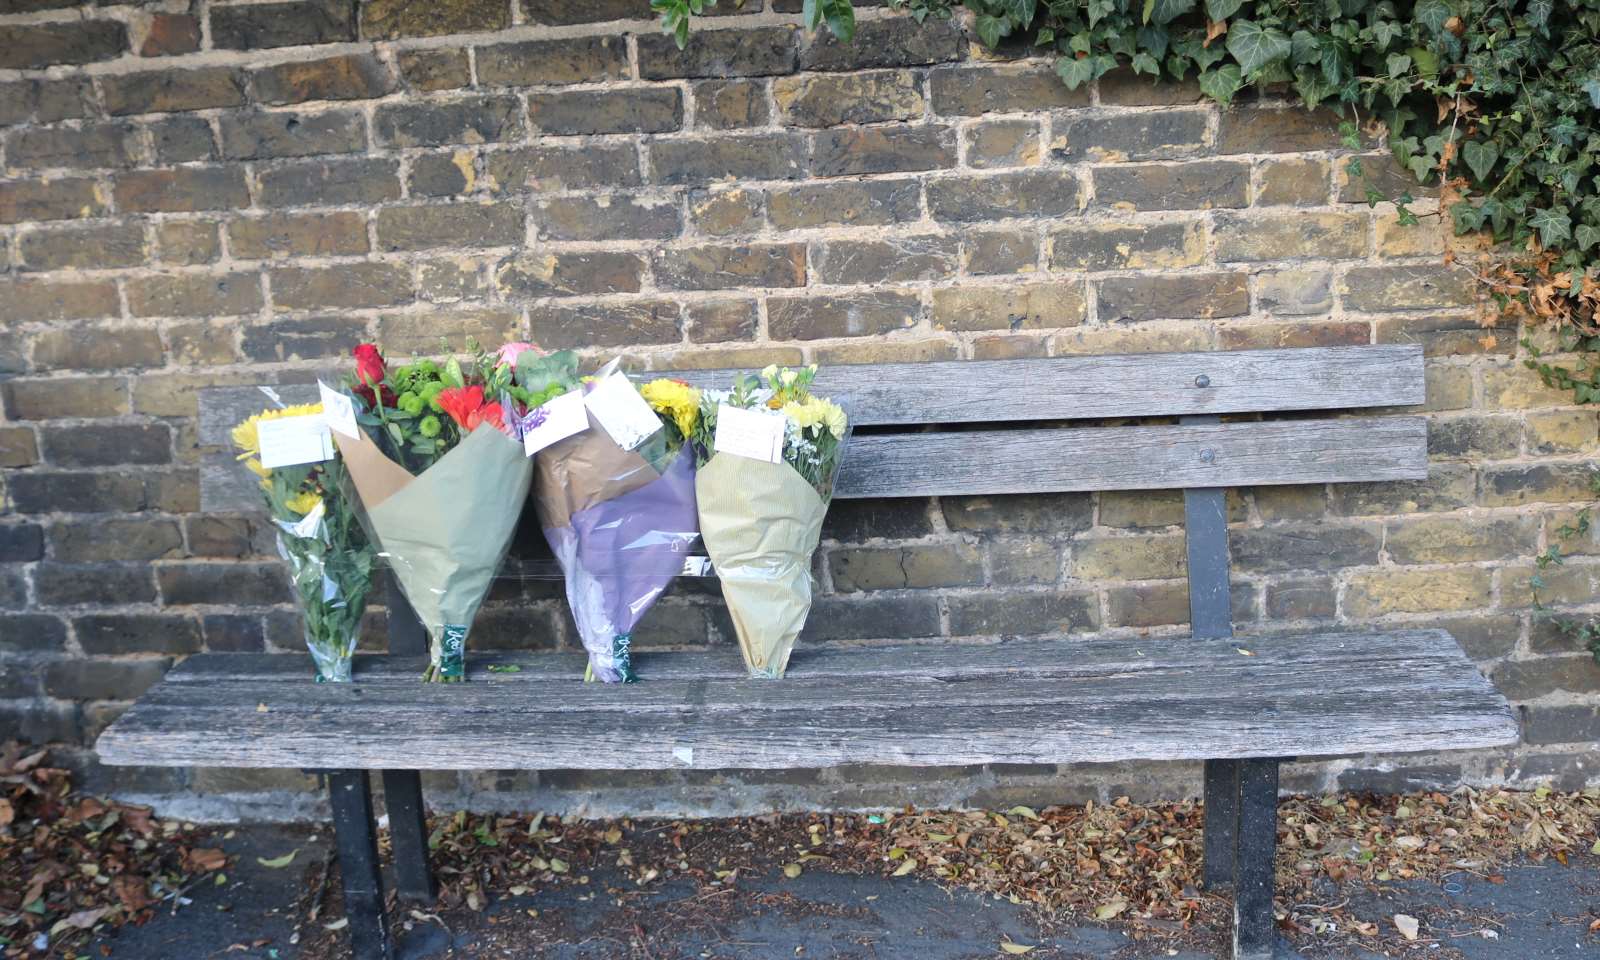 Floral tributes were left on the bench Michael Ryan was often seen sitting on.